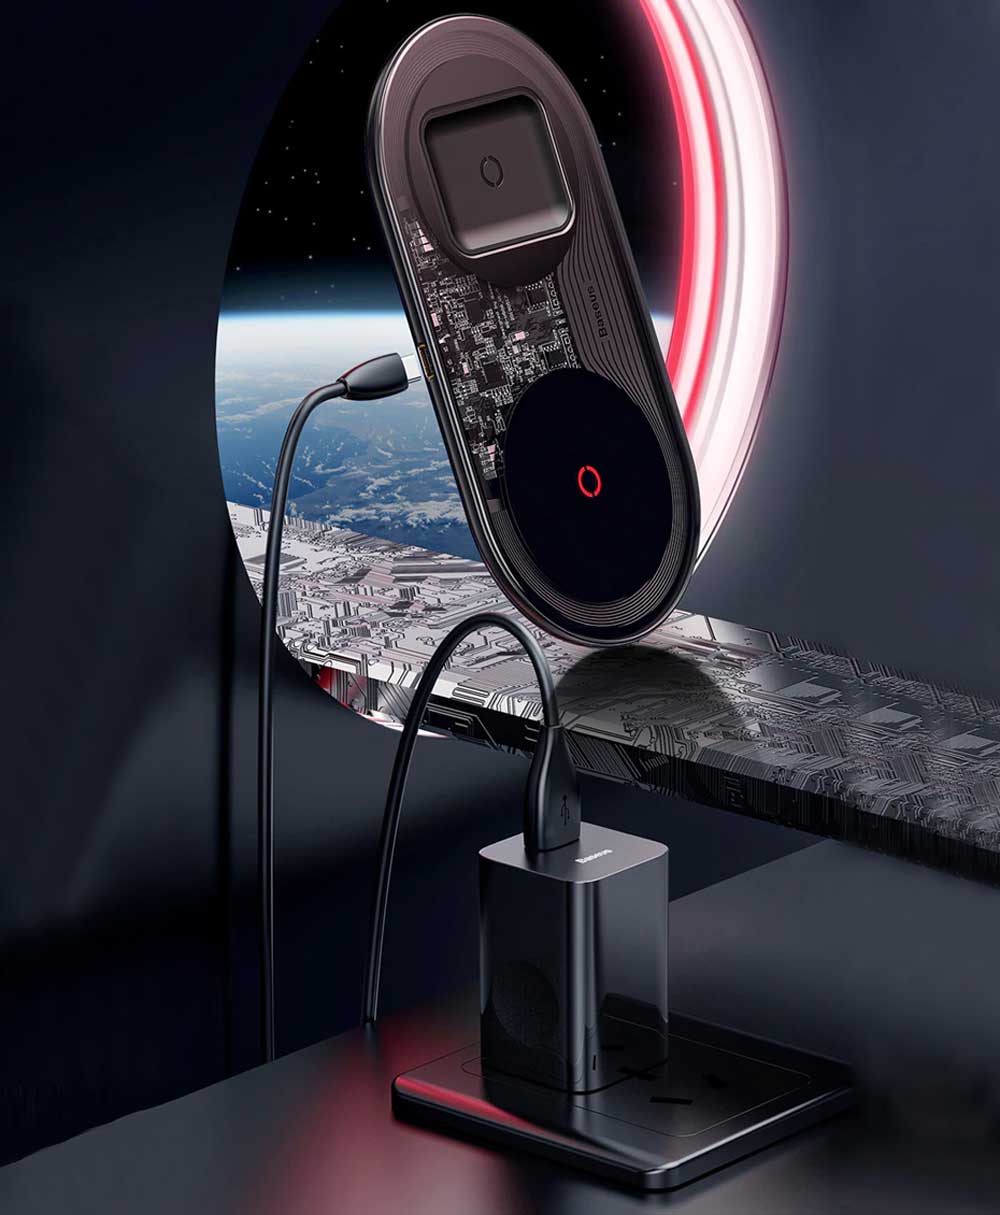 Baseus Simple 2 in1 Wireless Charger Turbo Edition 8